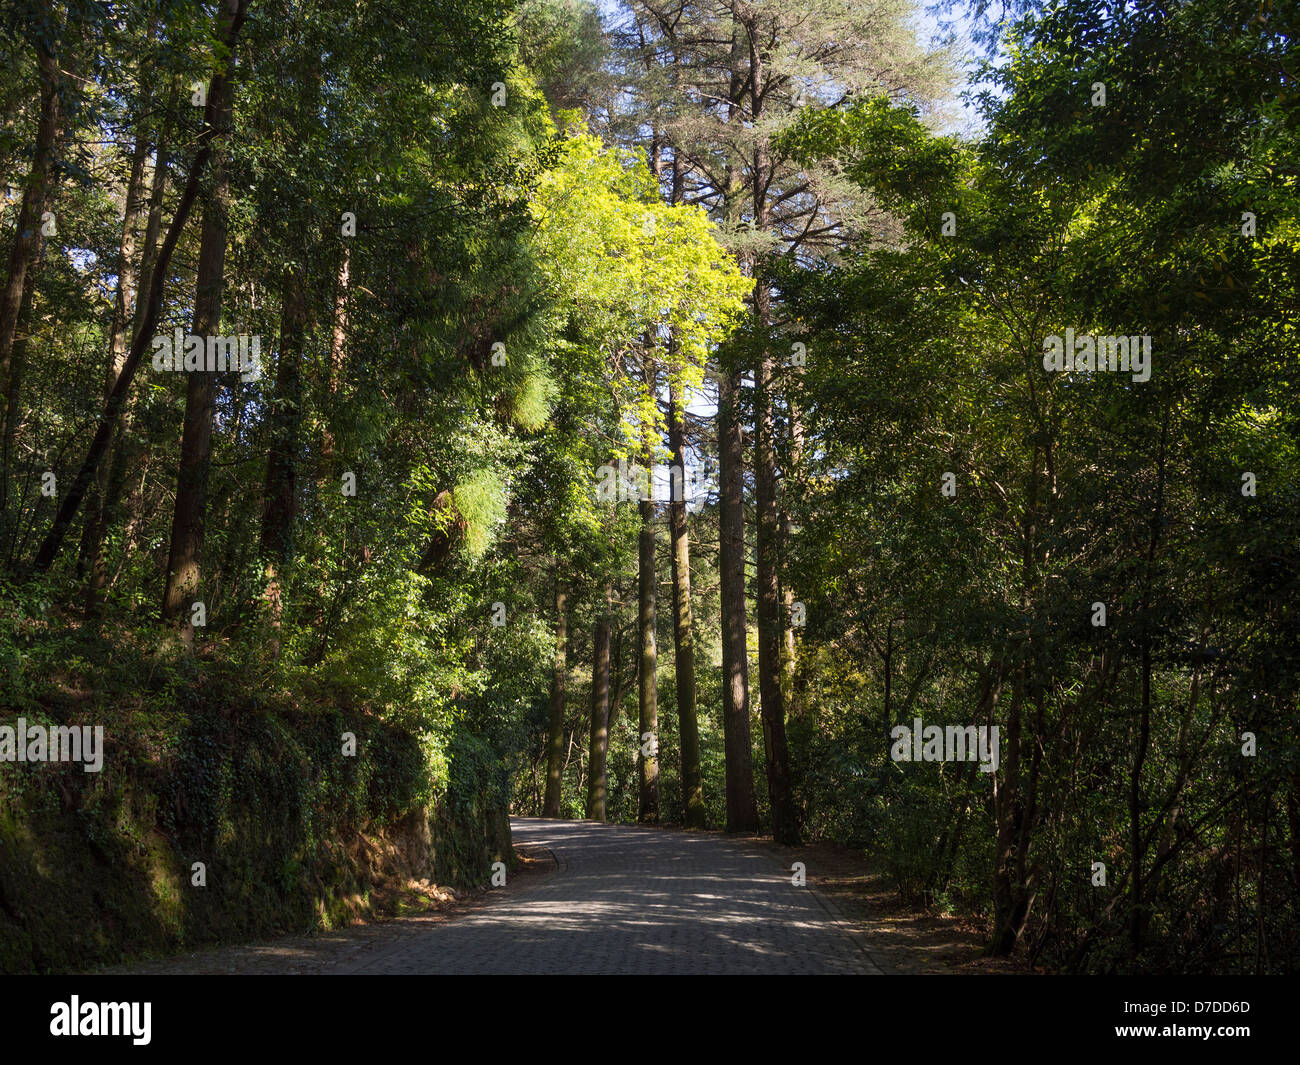 Open road in the forest with tall trees Stock Photo